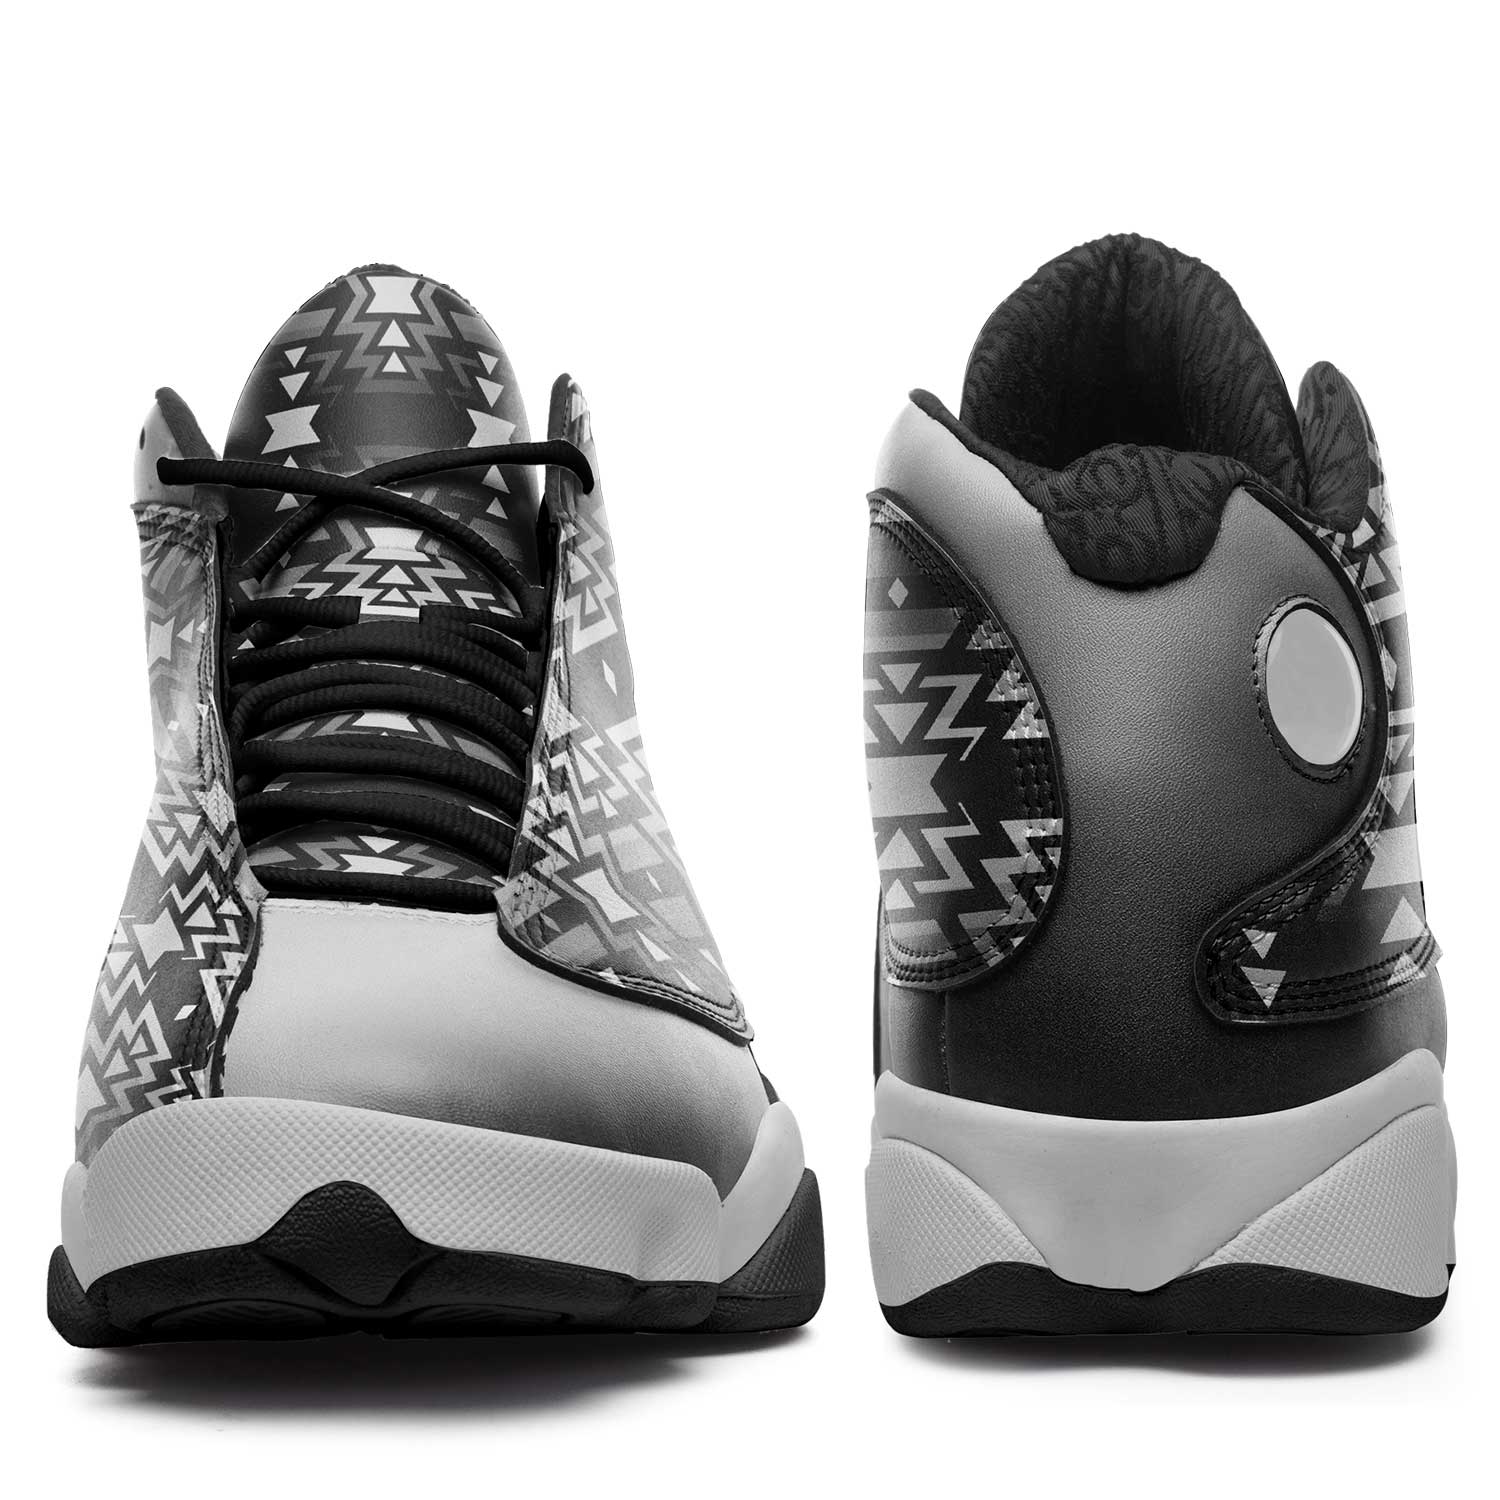 Black Fire Black and White Athletic Shoes Herman 